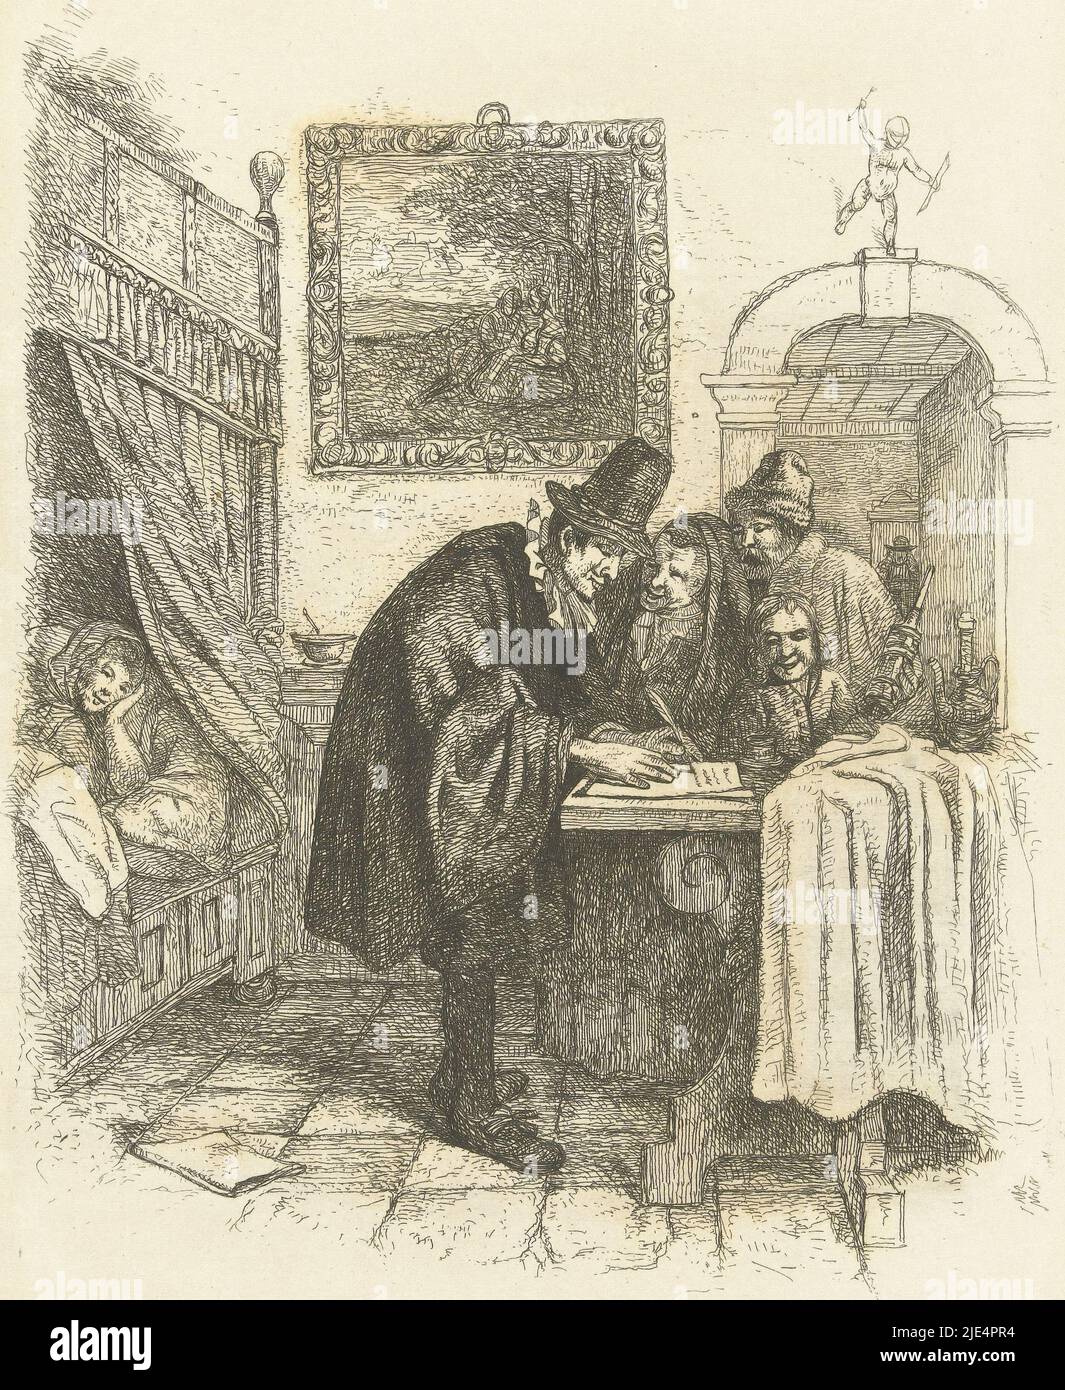 A doctor writes a prescription standing at a table. An old woman, a man with a clyster and a boy are watching. The patient, a sick woman, is lying in bed. In the interior, a painting hangs on the wall with a pastoral scene. On top of the bar is a small statue of Amor, Doctor on a home visit to a sick woman., print maker: Albertus Brondgeest, after: Jan Havicksz. Steen, Netherlands, 1796 - 1849, paper, etching, h 251 mm × w 164 mm Stock Photo